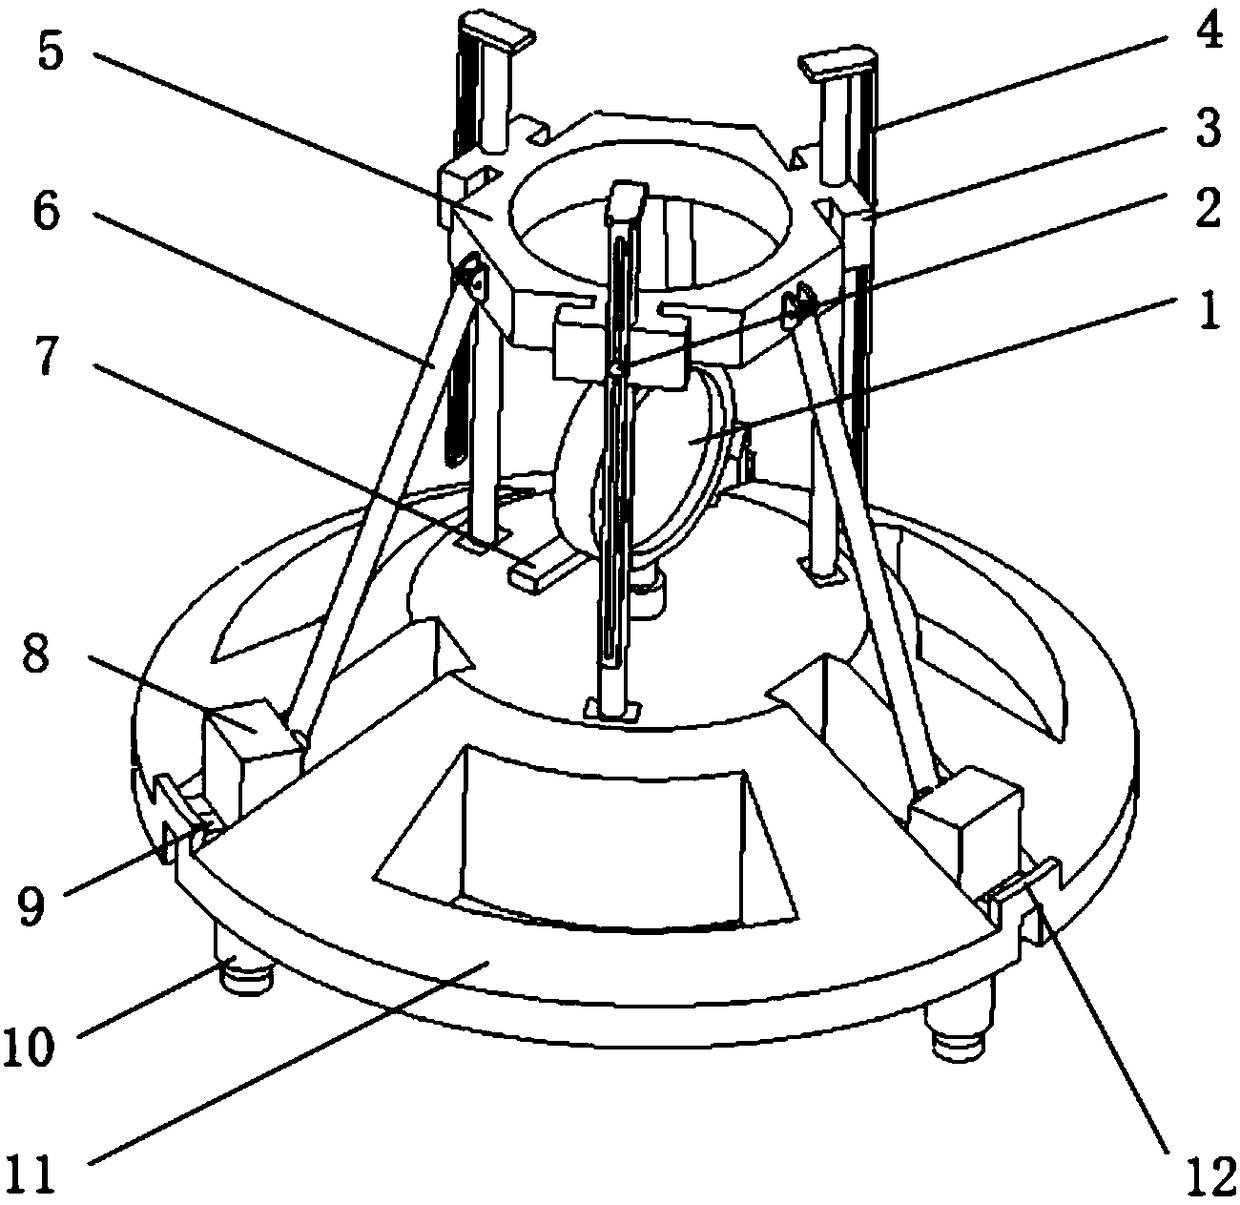 Spherometer with adjustable measuring diameter, and measuring method for radius of curvature and offset